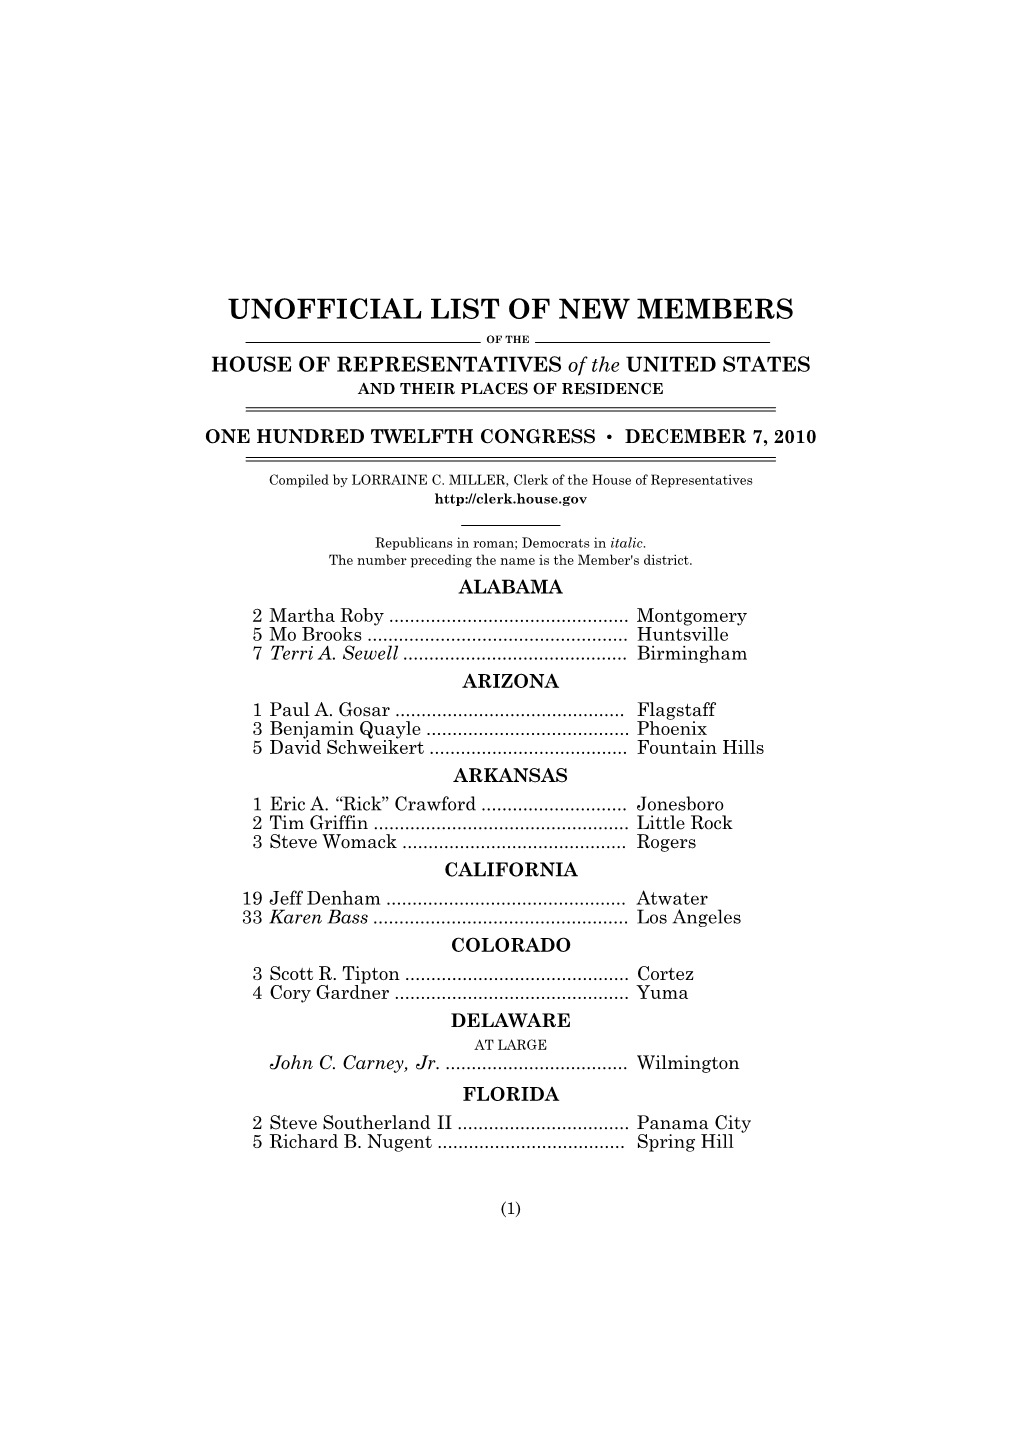 UNOFFICIAL LIST of NEW MEMBERS of the HOUSE of REPRESENTATIVES of the UNITED STATES and THEIR PLACES of RESIDENCE